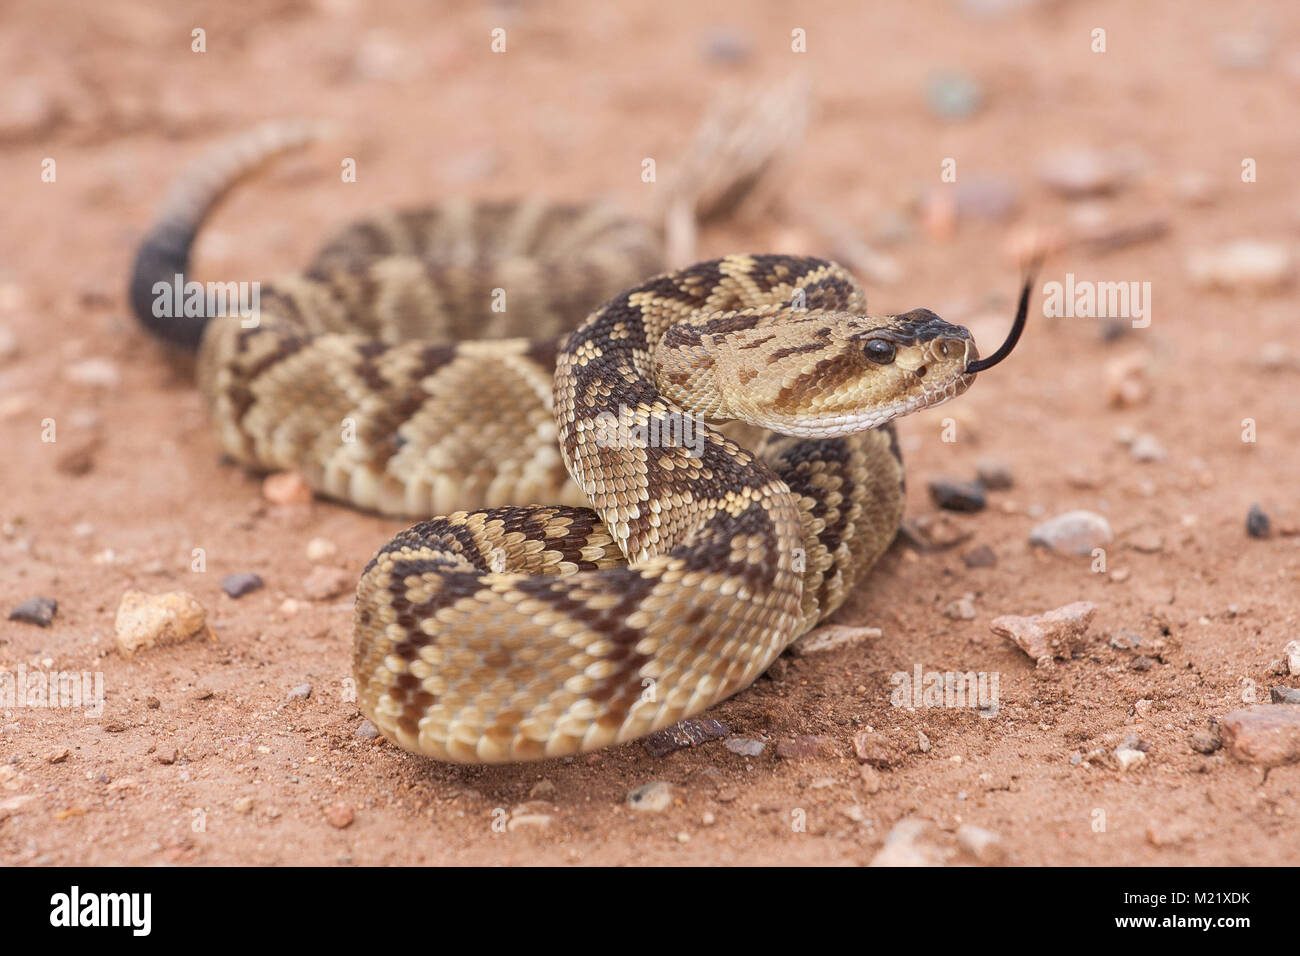 Crotalus molossus is a venomous pit viper species found in the southwestern United States and Mexico. Macro portrait. Common names: black-tailed rattlesnake, green rattler, Northern black-tailed Stock Photo